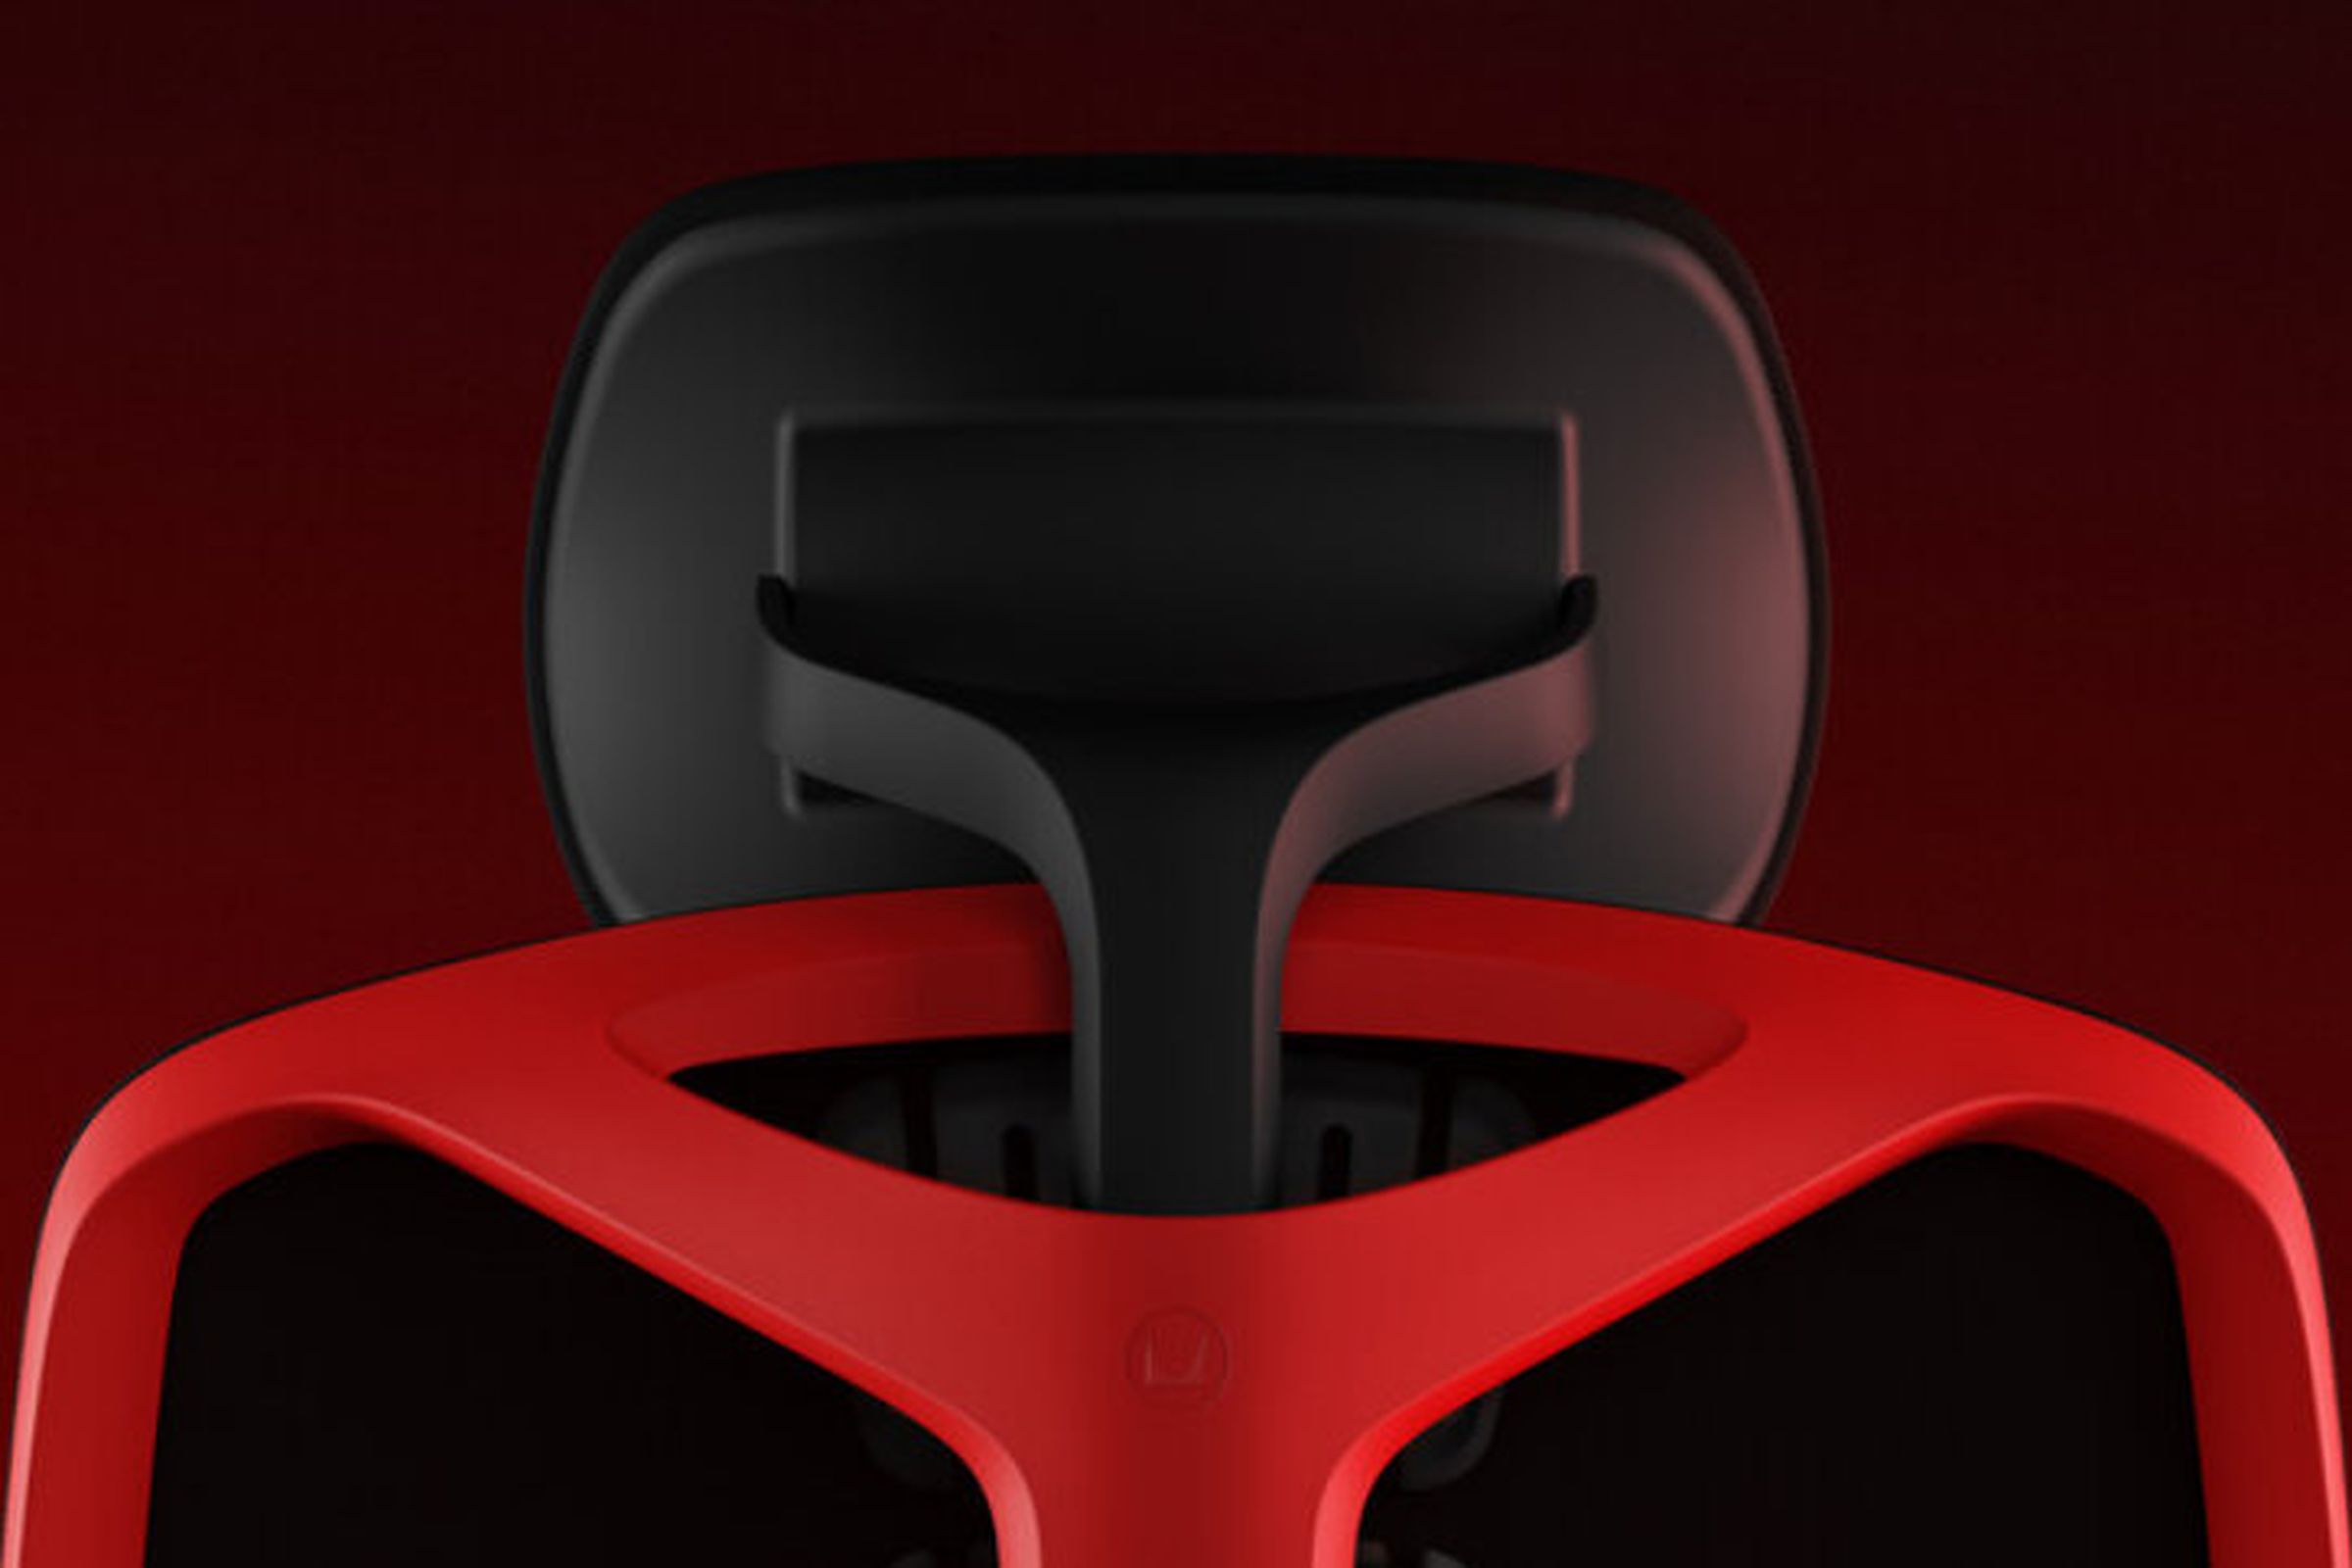 A picture showing the backside of the Herman Miller and Logitech Vantum gaming chair in red and black. It’s focused on the new adjustable headrest.